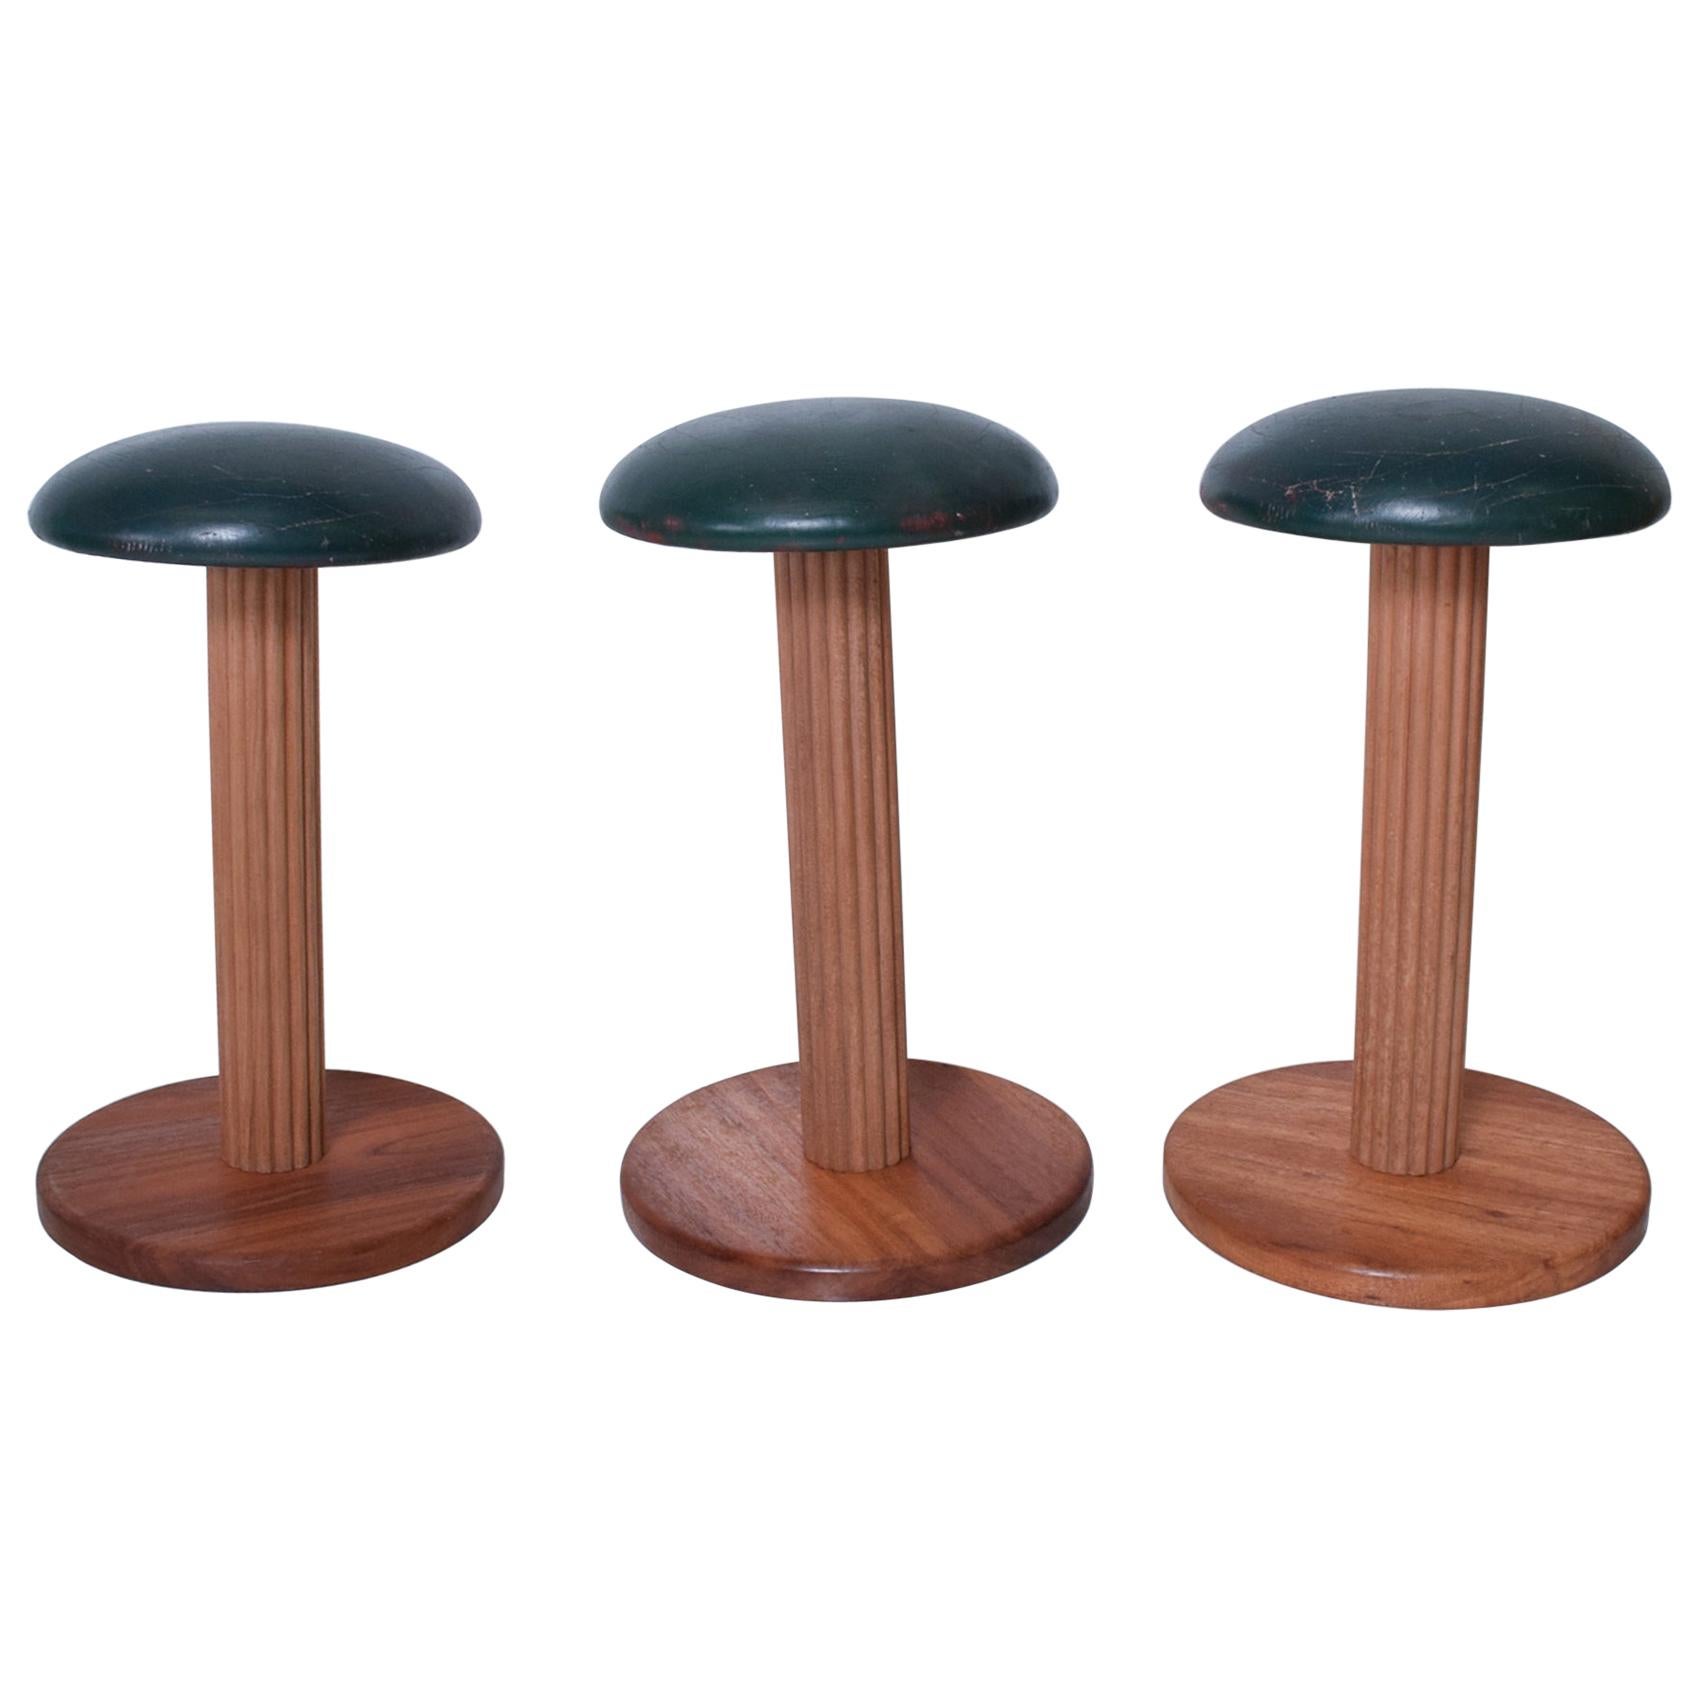  French Art Deco Distressed Leather Wood Bar Stools (3)  from France 1950s